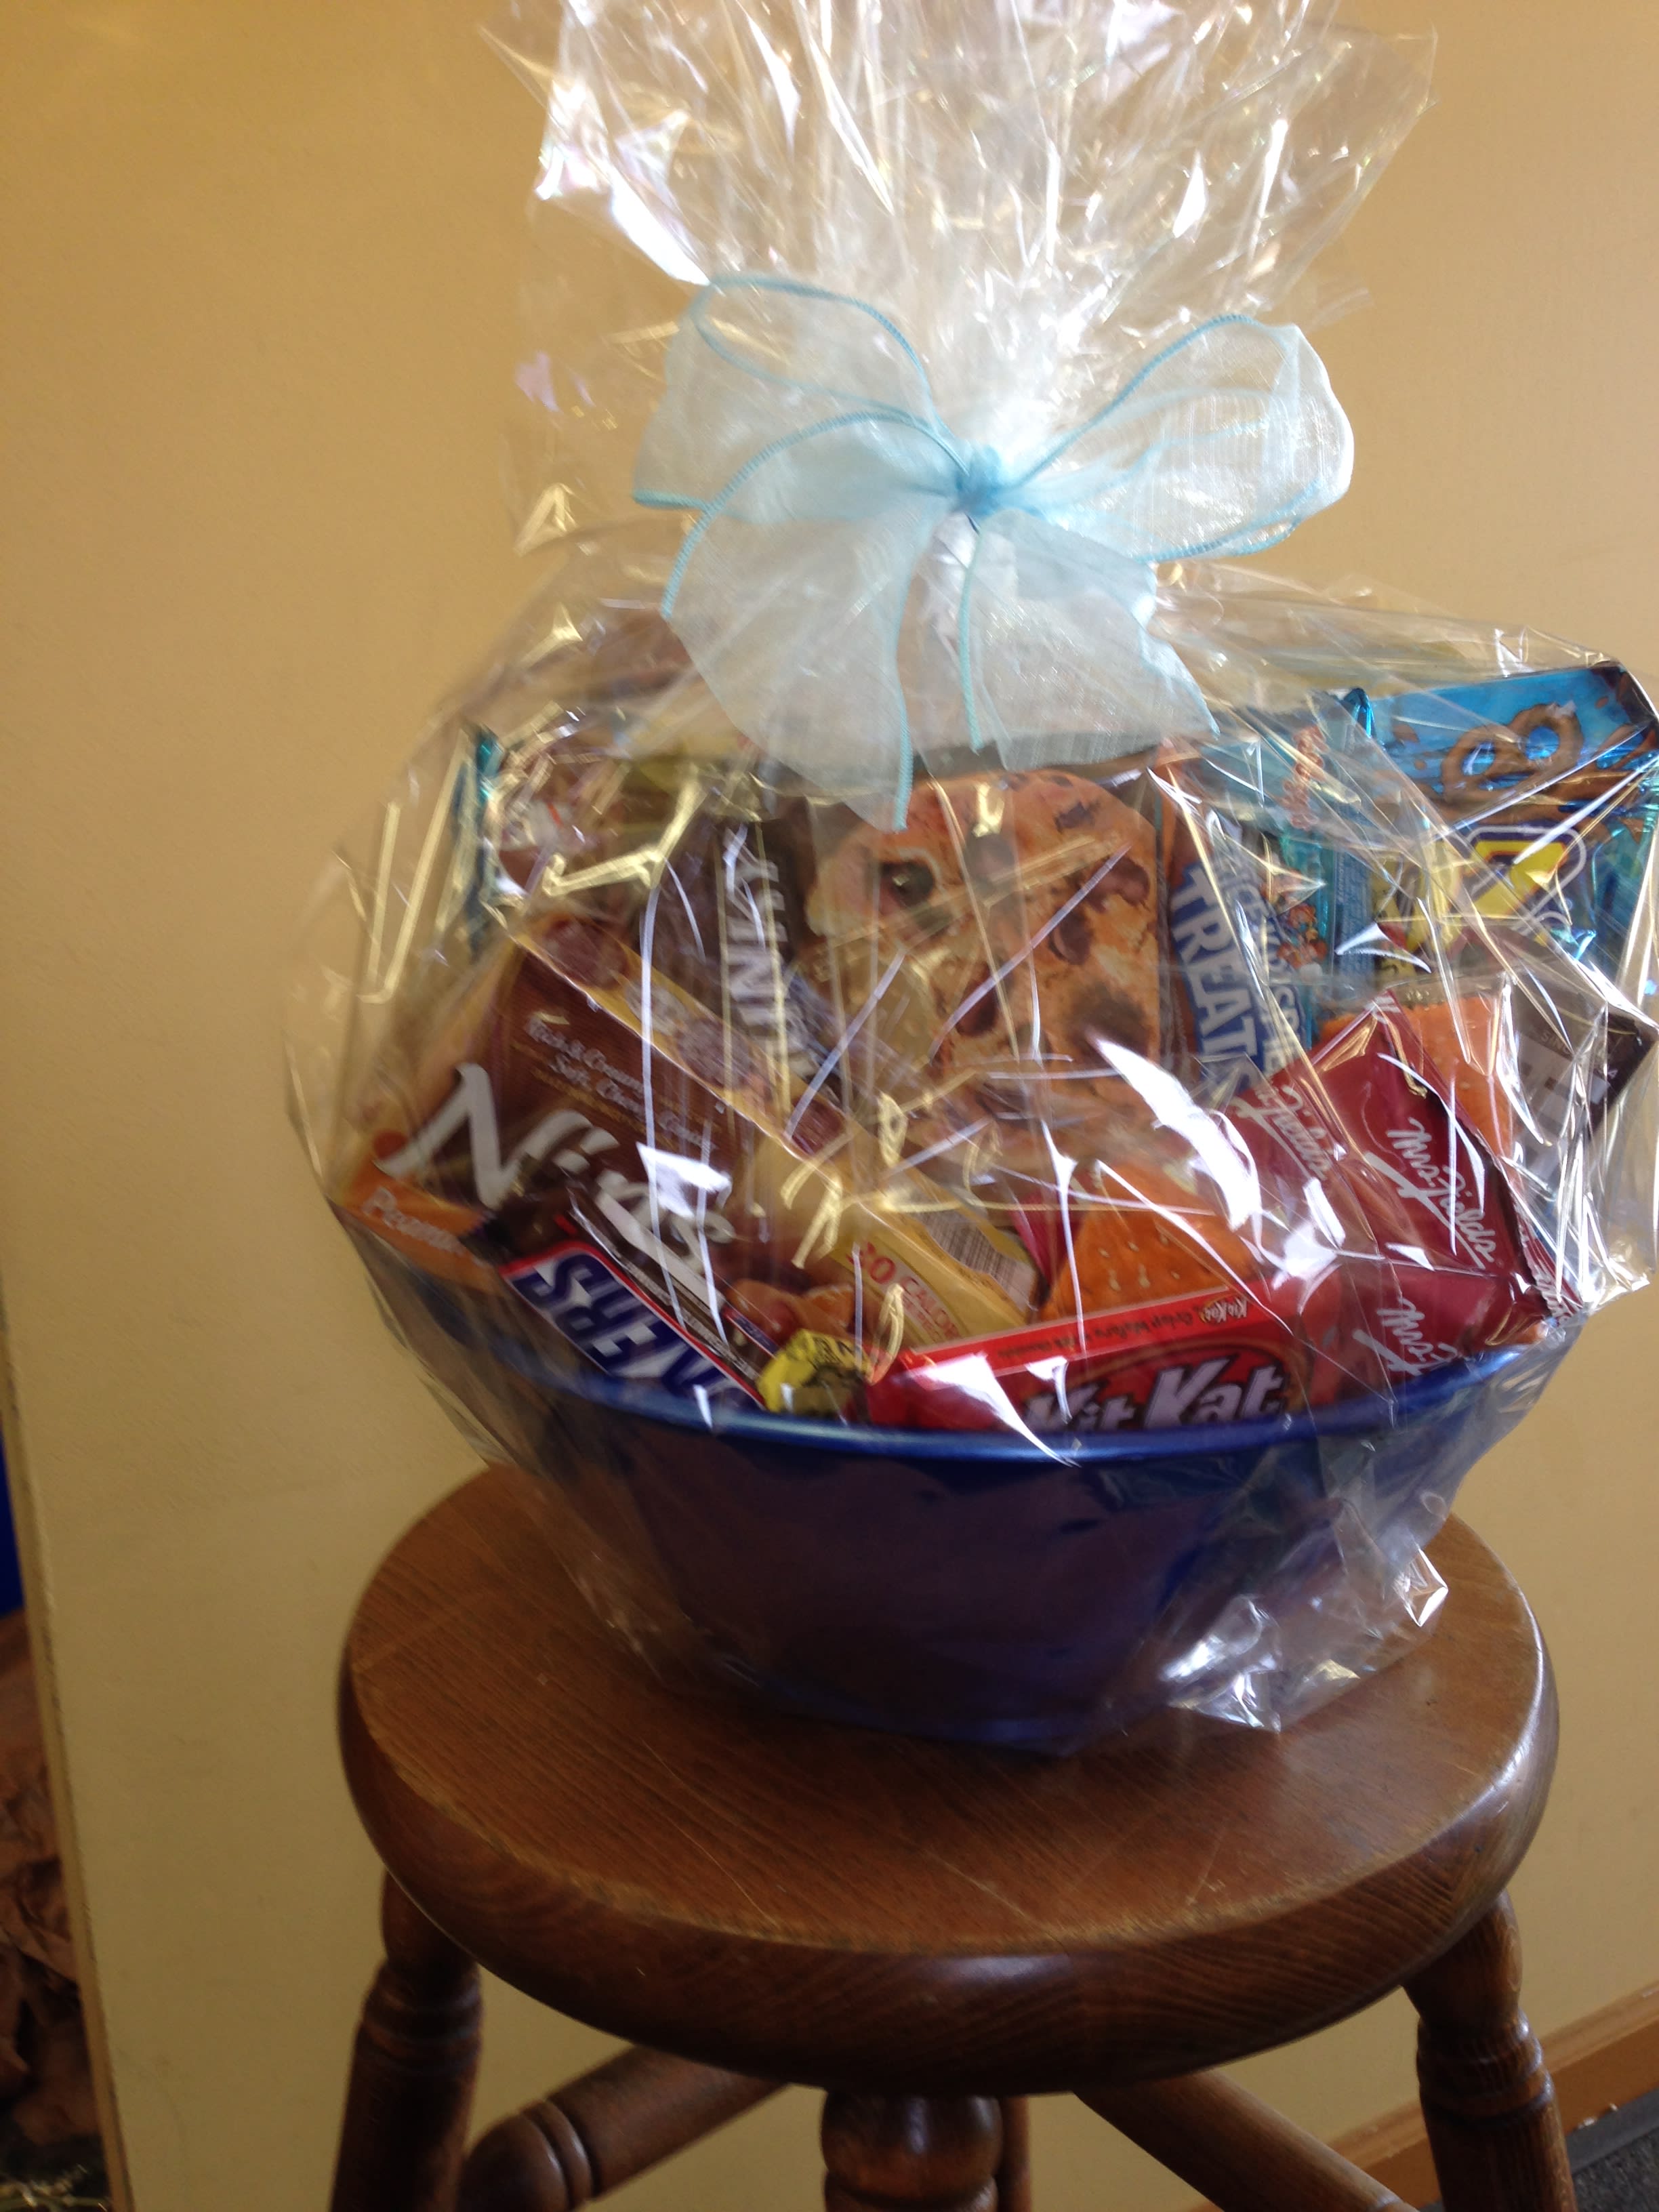 Junk Food Basket - Perfect for the snack lover in your life. Our Junk Food Basket are filled with the tastiest goodies such as Candy Bars, Cookies, Chips, Pretzels, Crackers and Juices. Baskets can be customized. *24 hours notice required on all fruit and gourmet baskets*